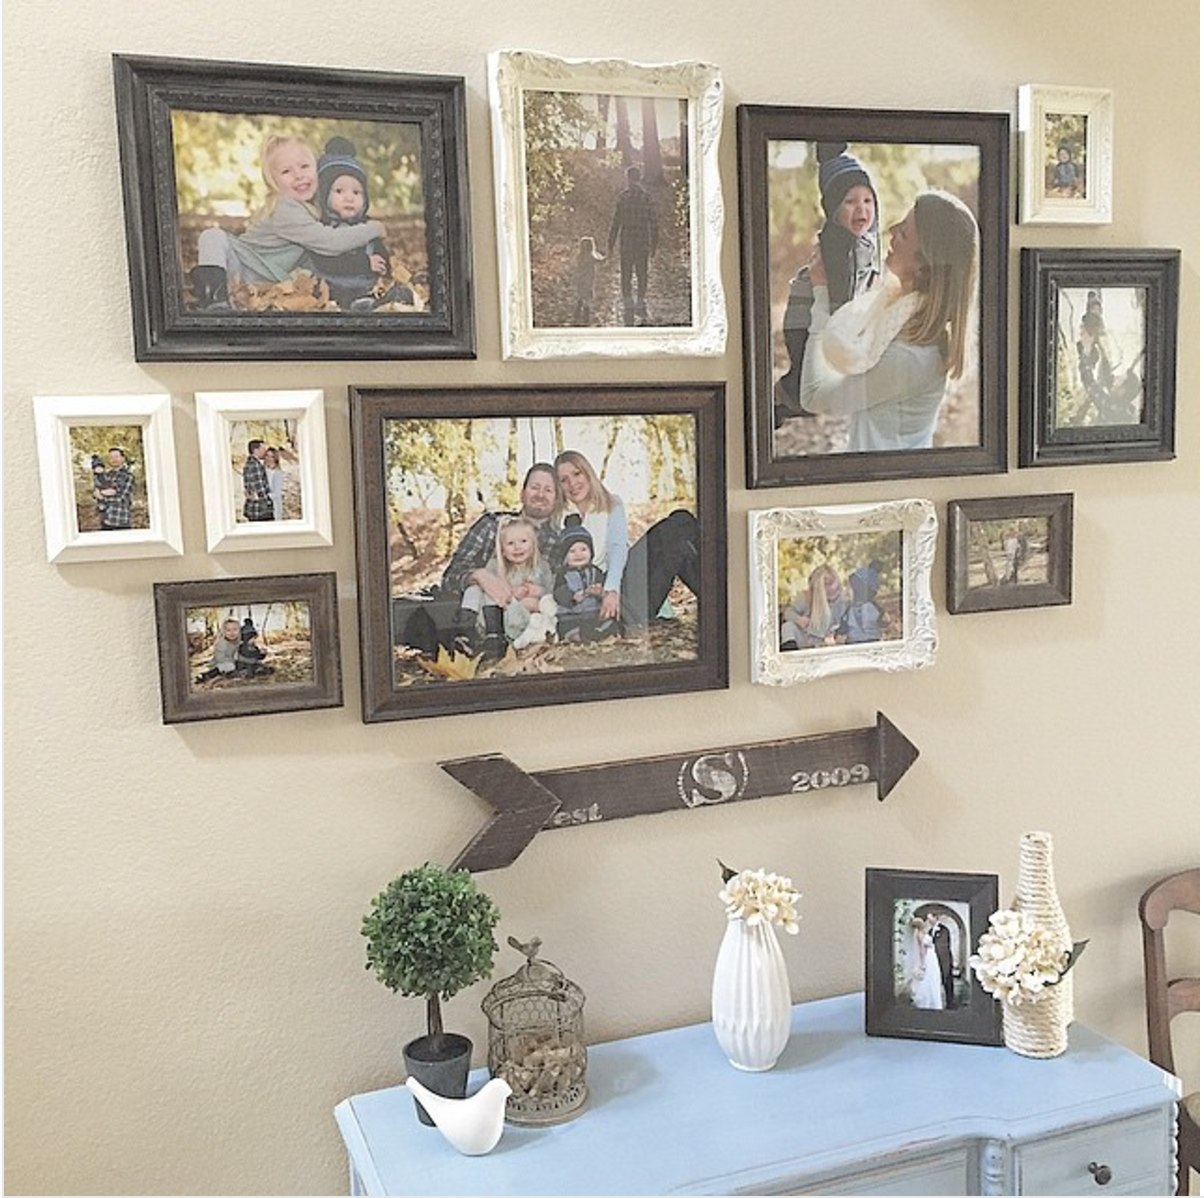 25 must-try rustic wall decor ideas featuring the most amazing intended  imperfections XUIRZAV